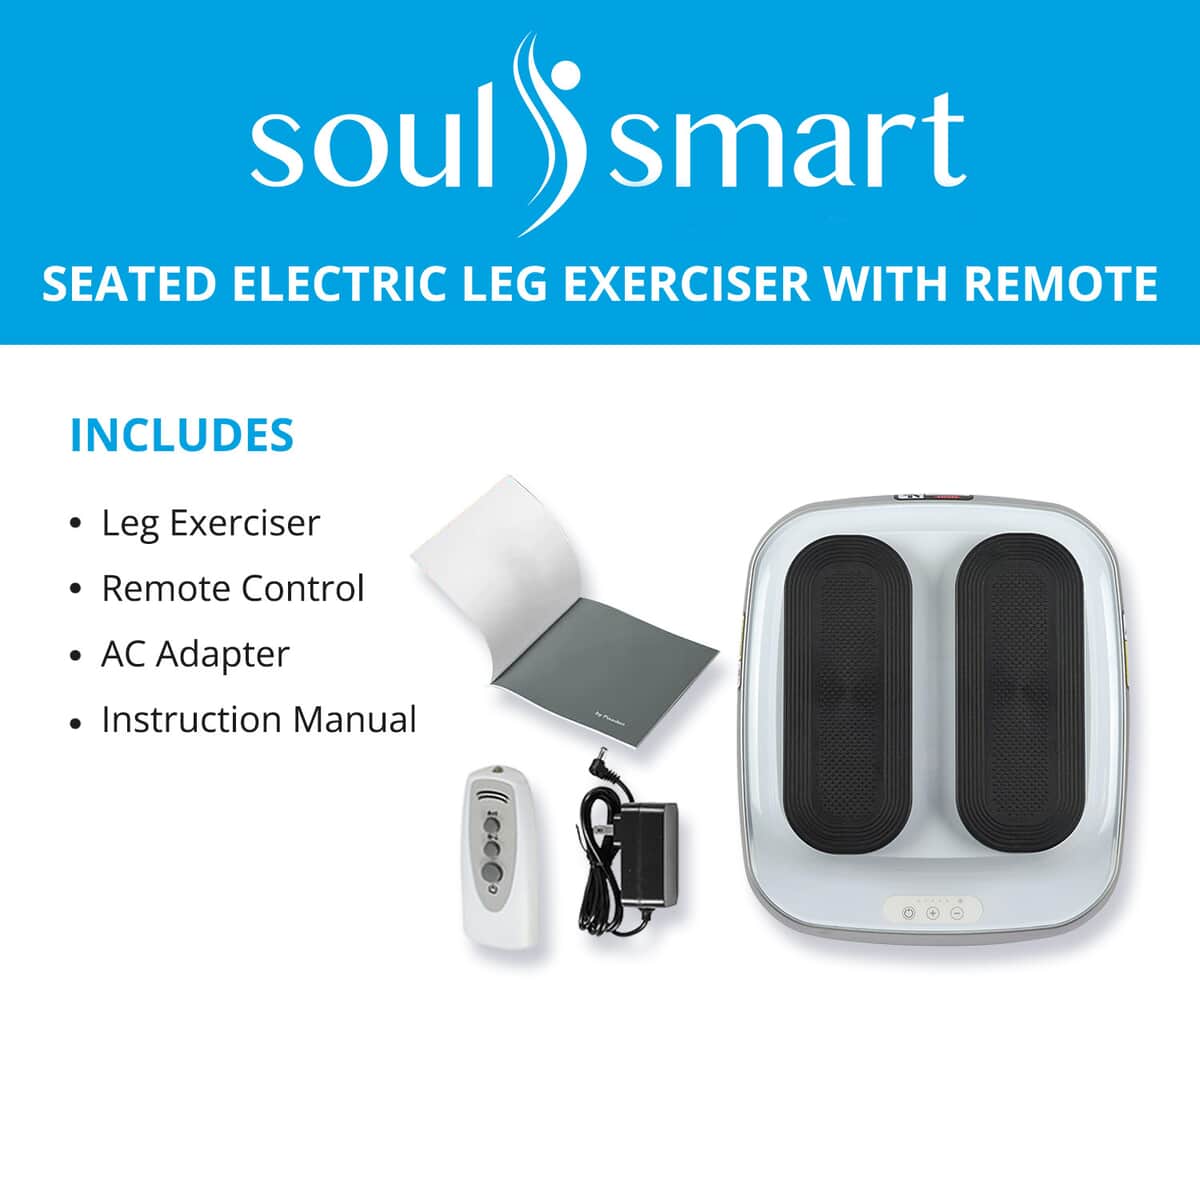 SoulSmart Seated Electric Leg Exerciser with Remote, Leg Workouts, Leg Exercises at Home, Lower Body Exercises image number 5